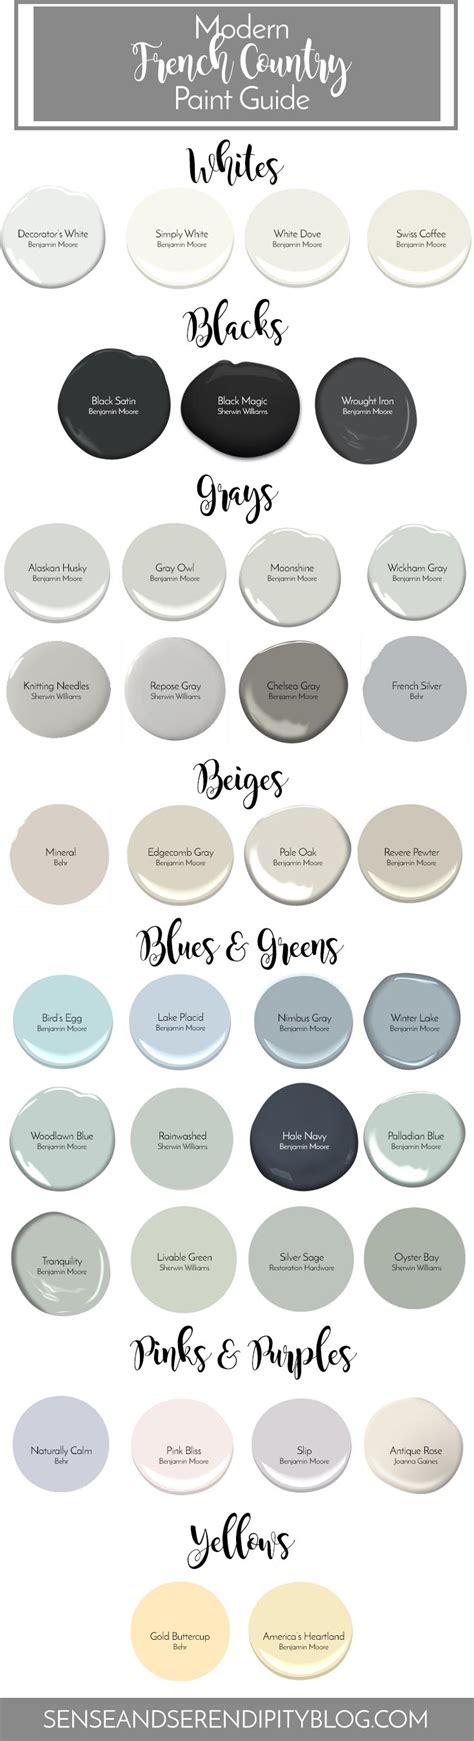 Modern French Country Paint Guide | Sense & Serendipity